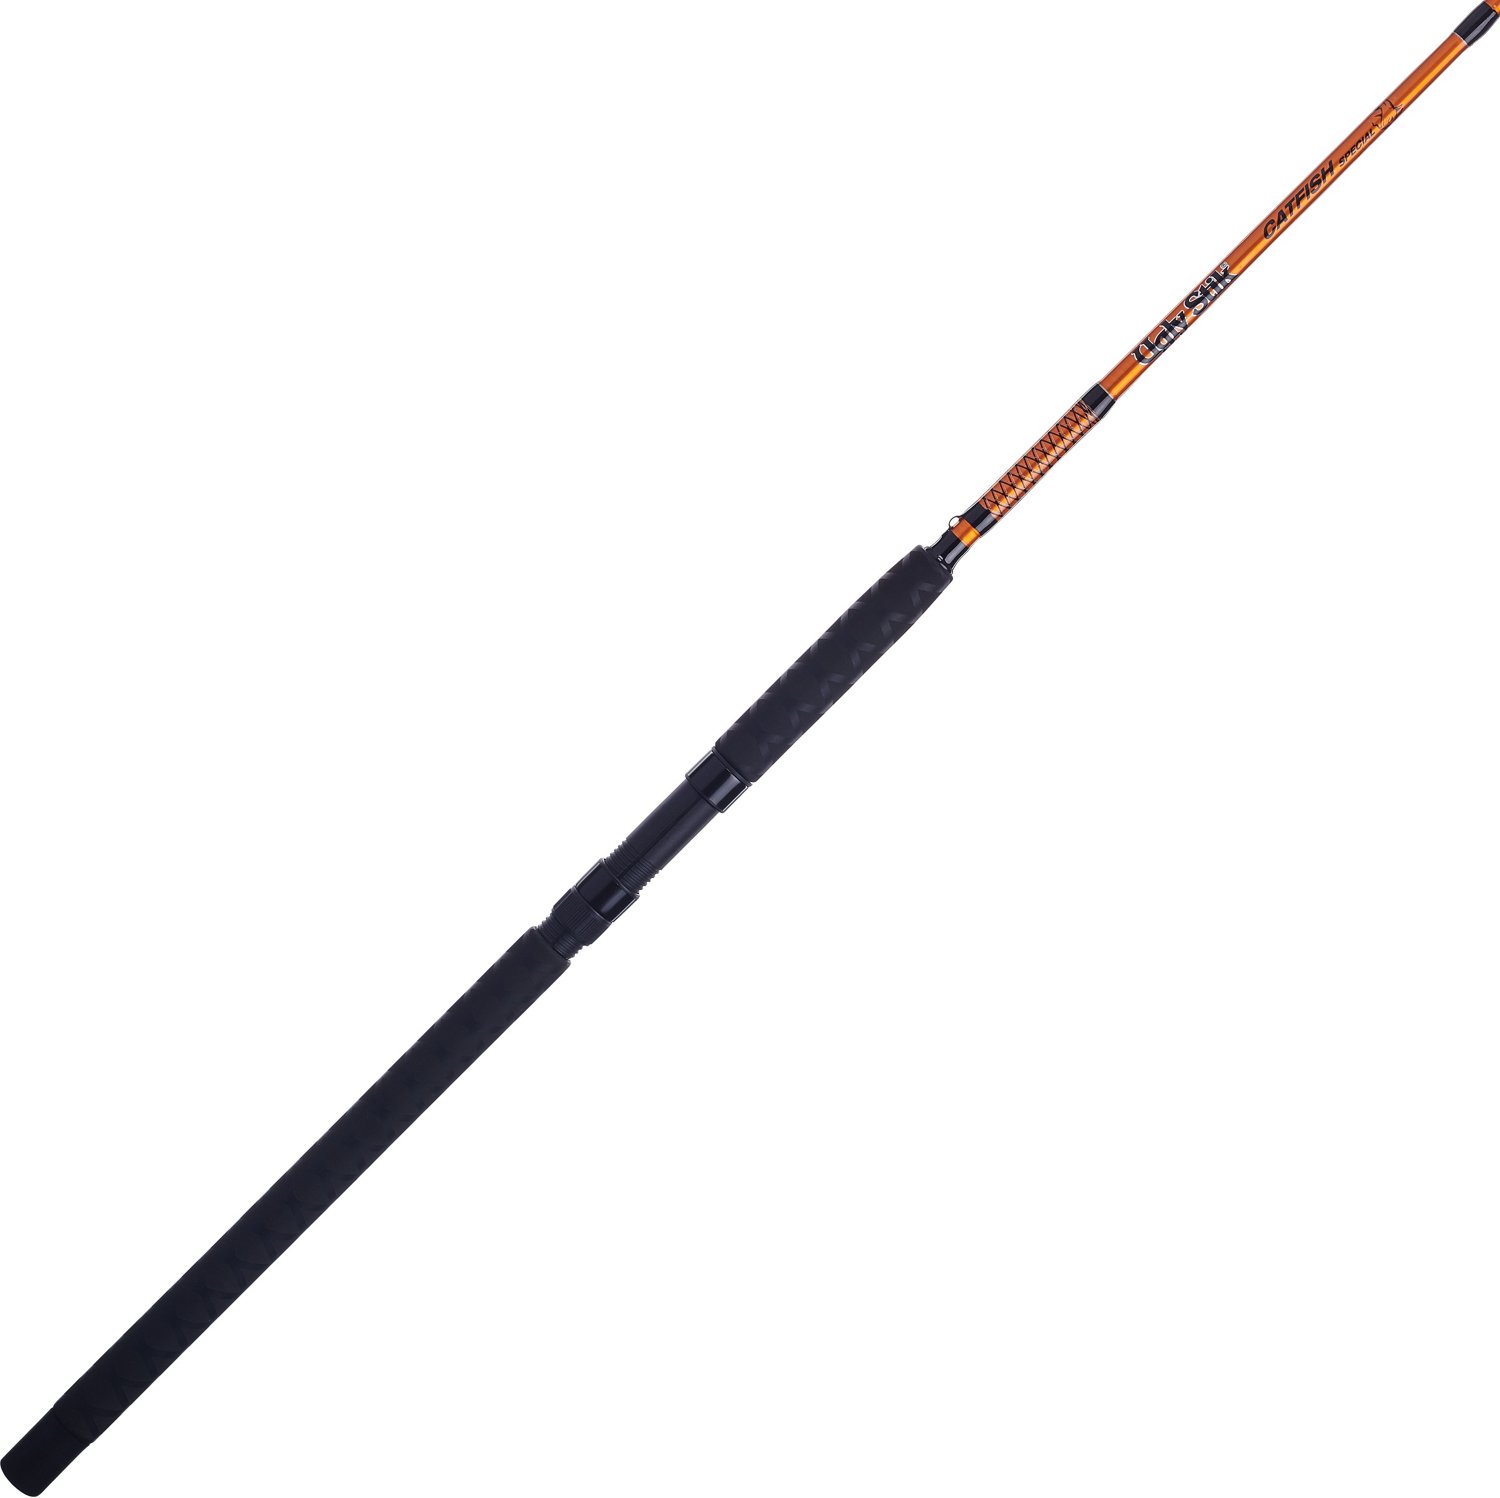 Academy Sports + Outdoors Ugly Stik Catfish Special 8 ft MH Spinning Rod